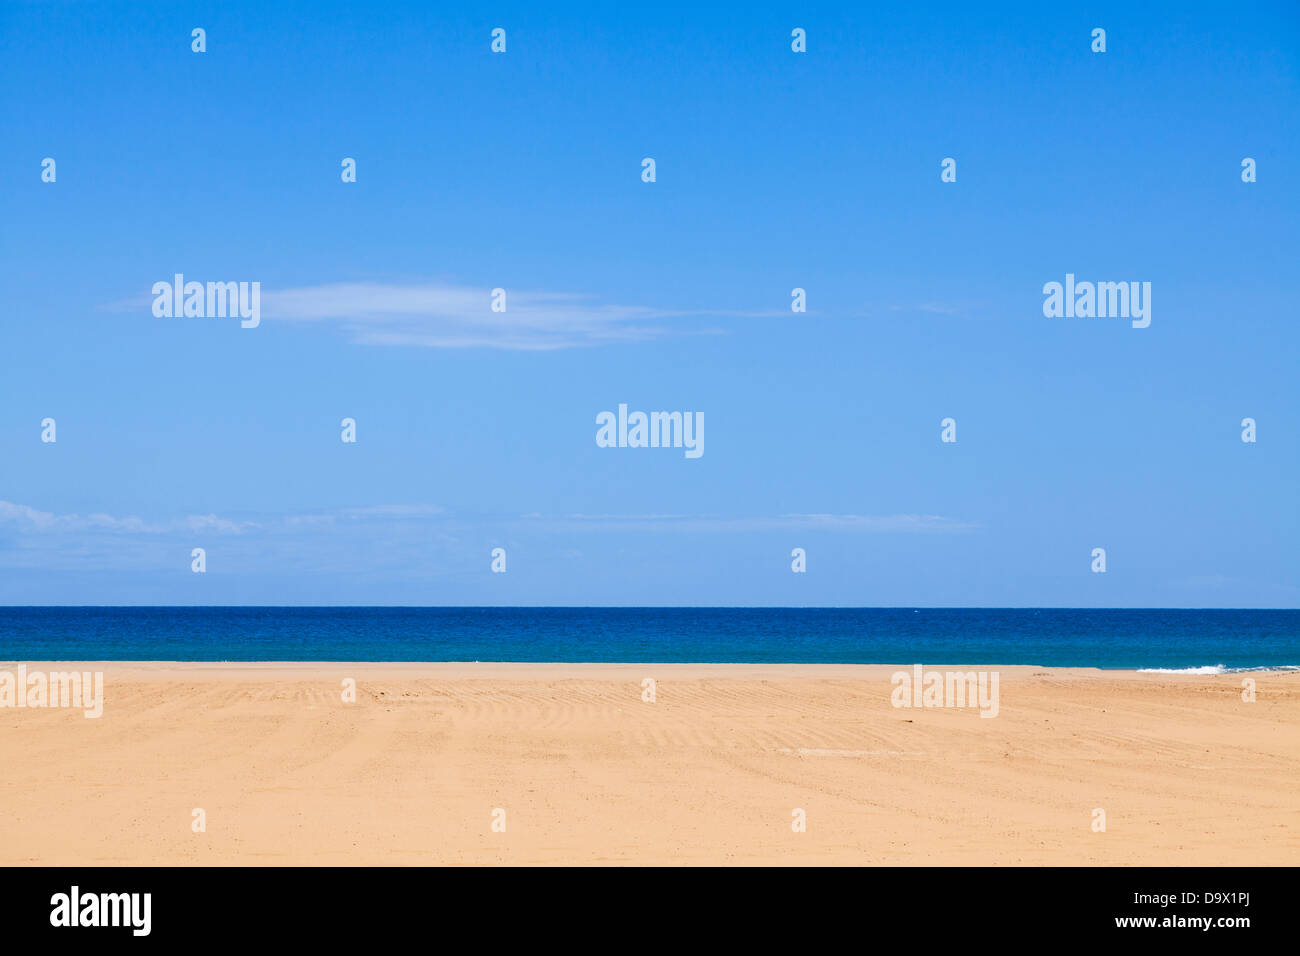 Horizontal lines of sandy beach with blue sea and sky. Stock Photo